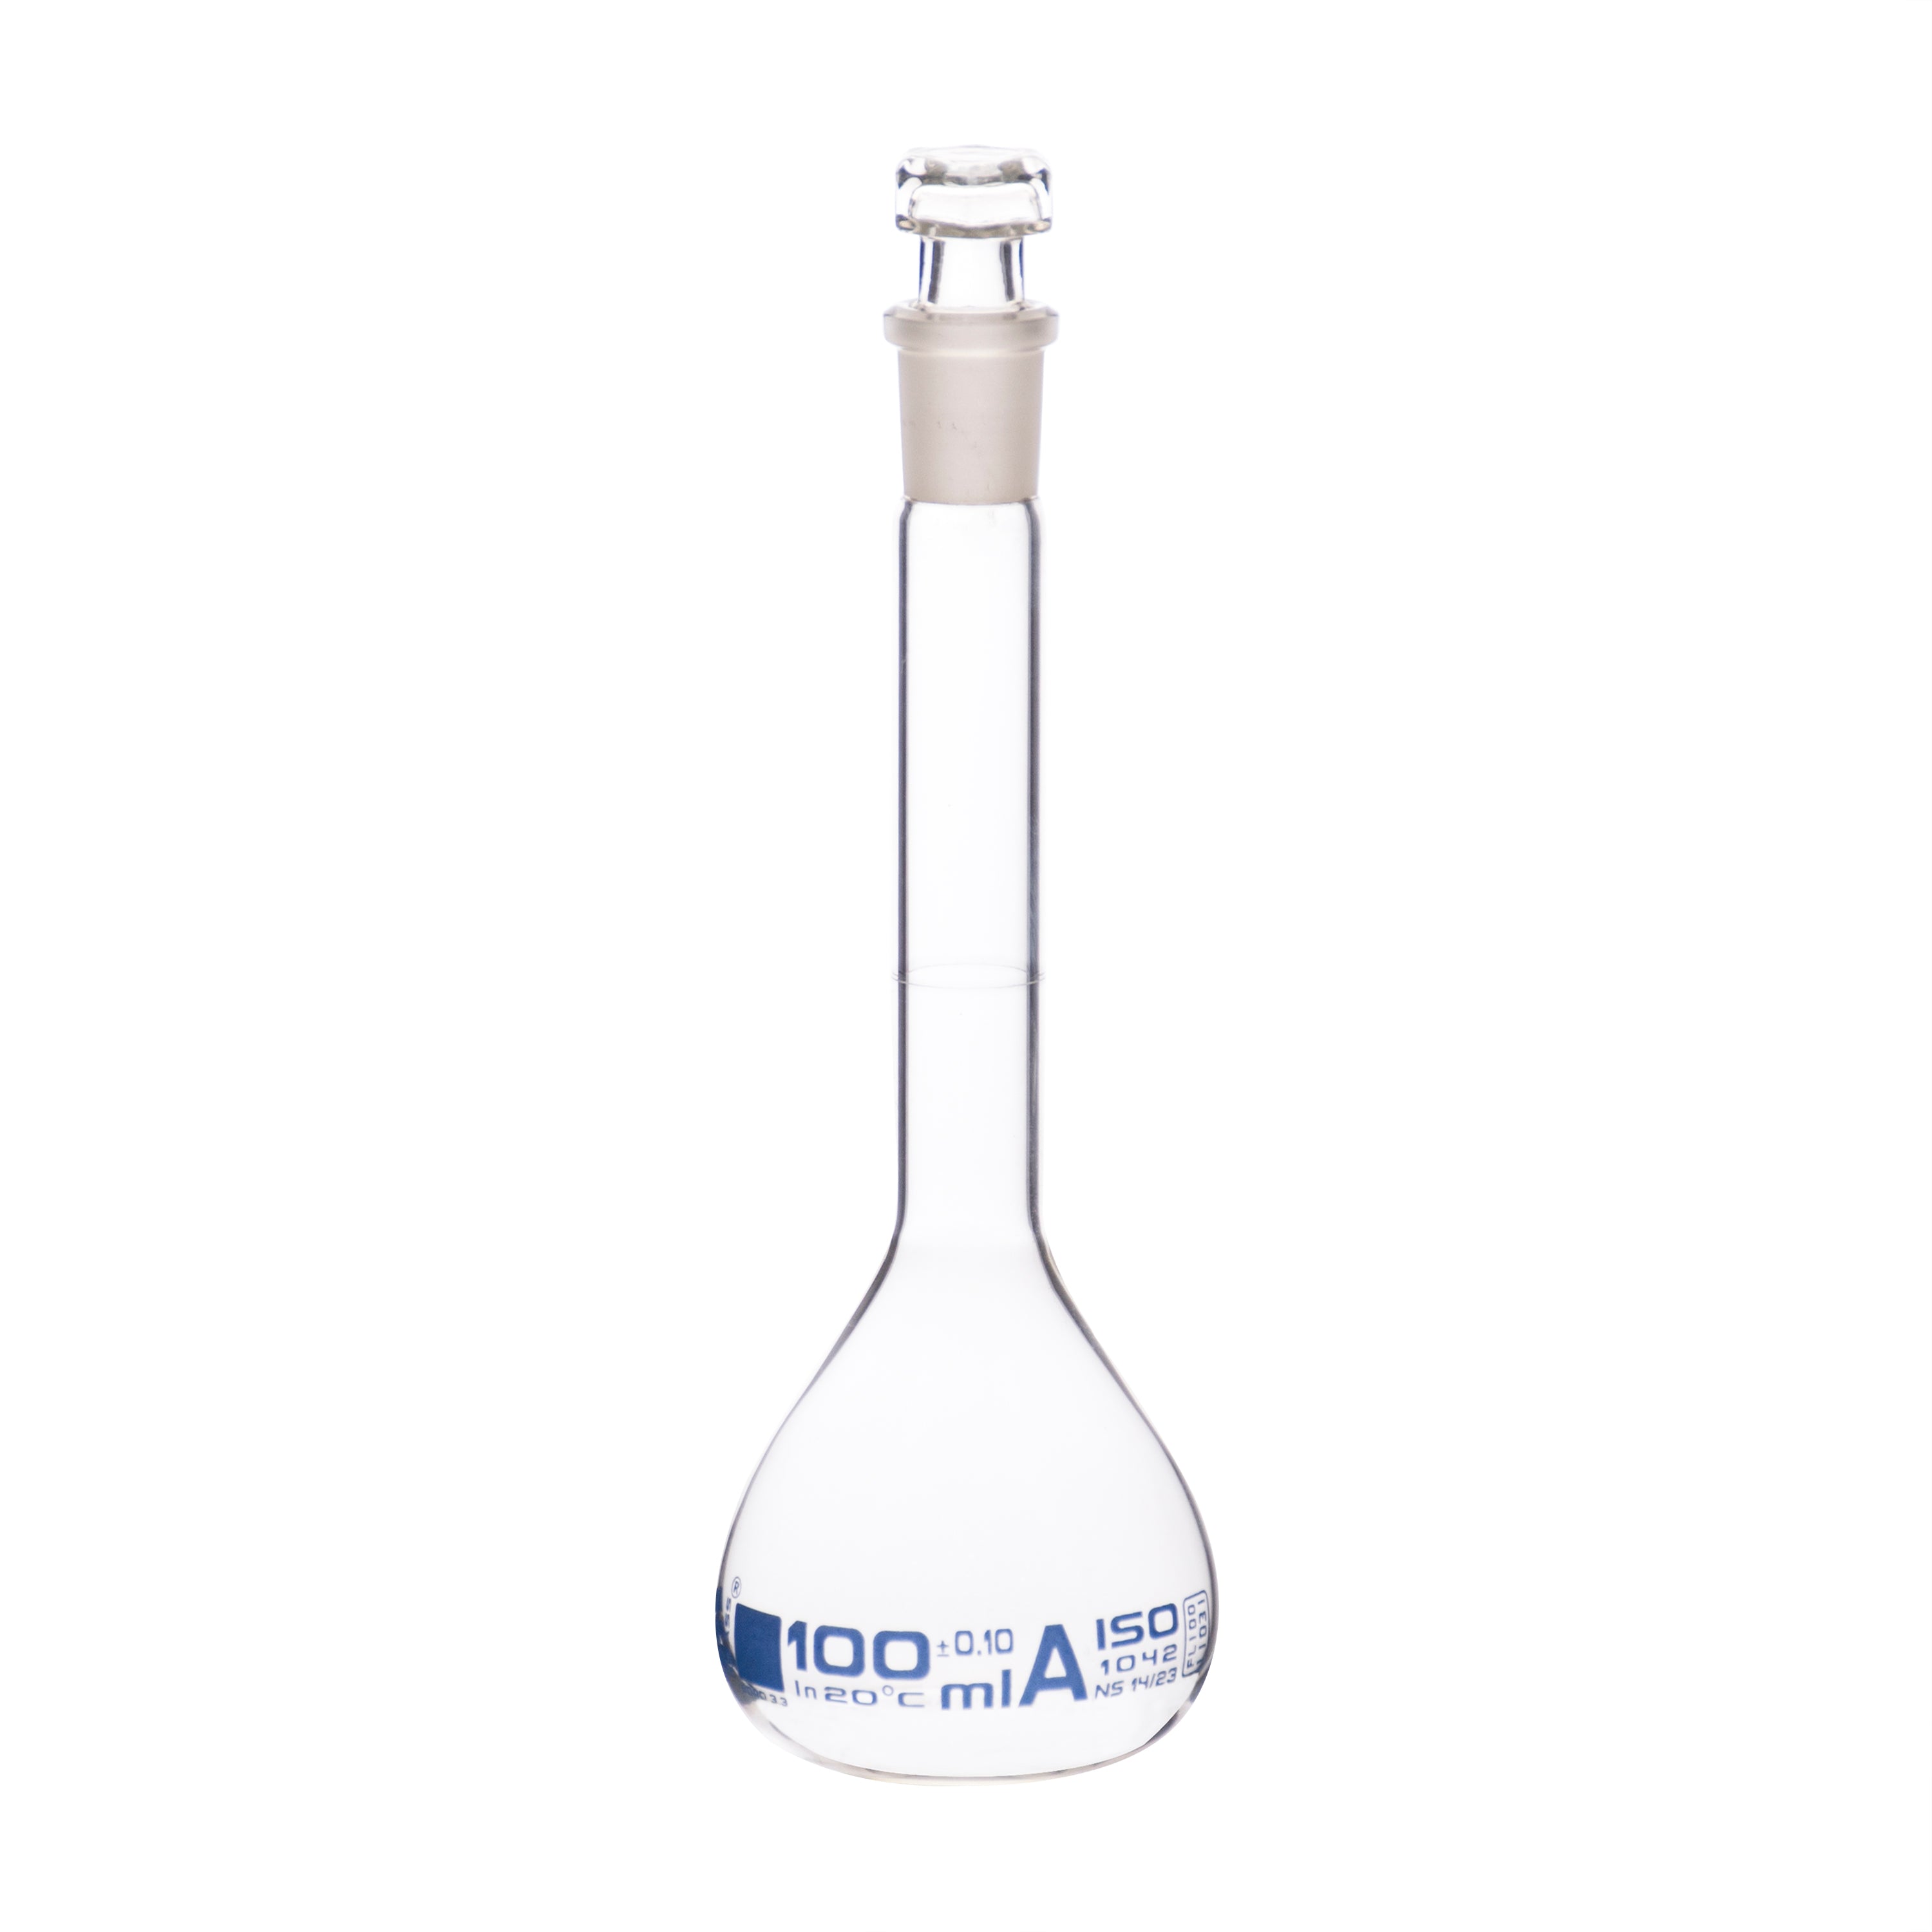 Borosilicate Volumetric Flask with Hollow Glass Stopper, 100ml, Class A, Blue Print, Autoclavable